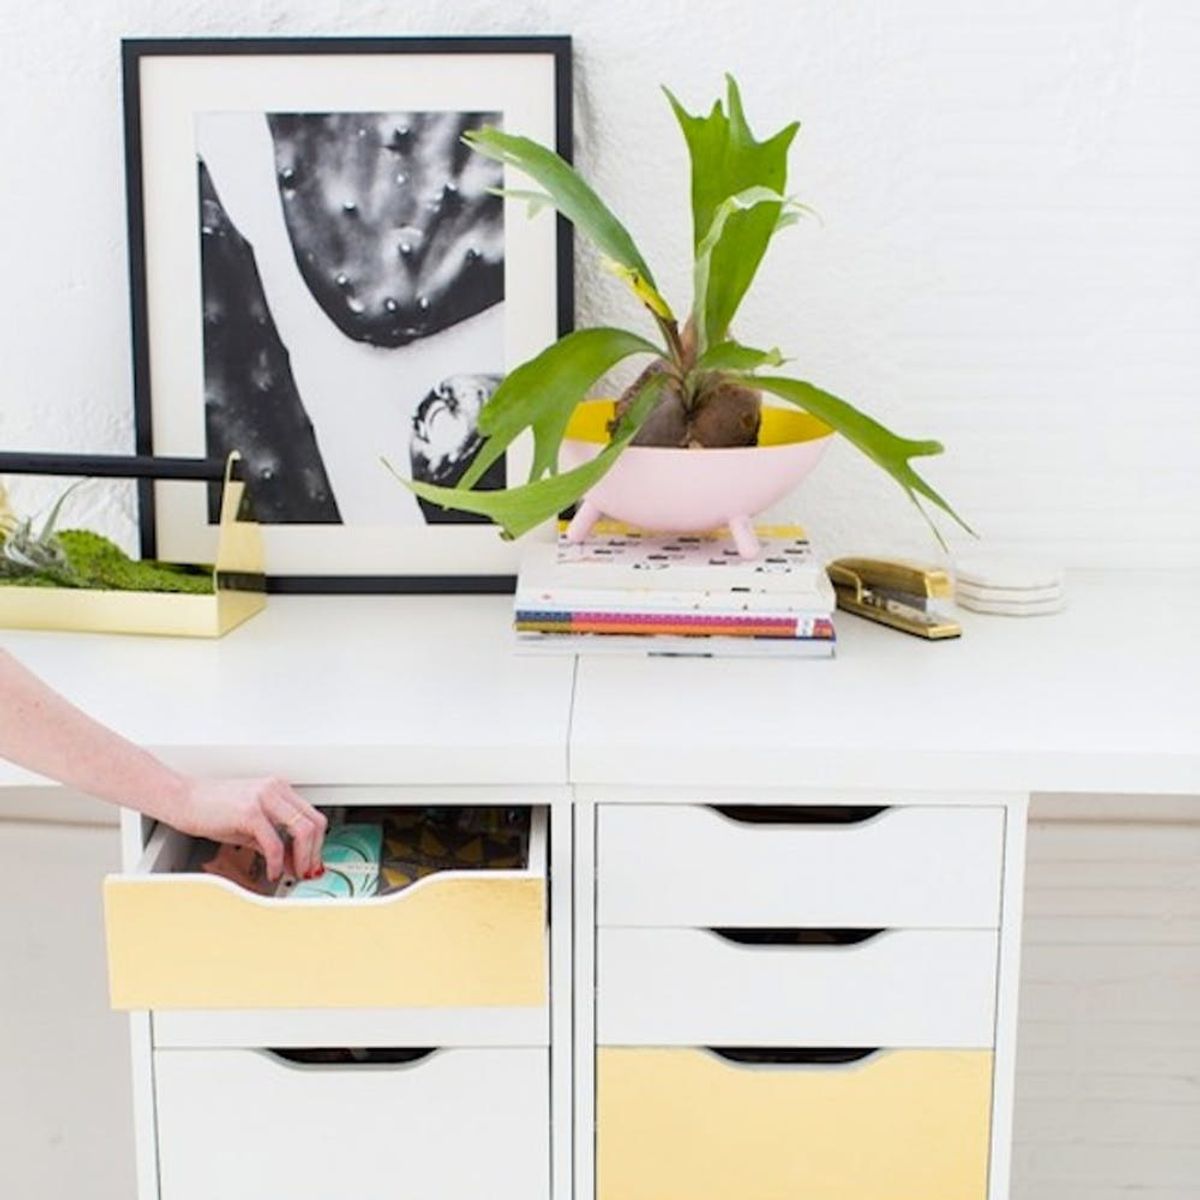 18 IKEA Storage Hacks for Every Room in the House